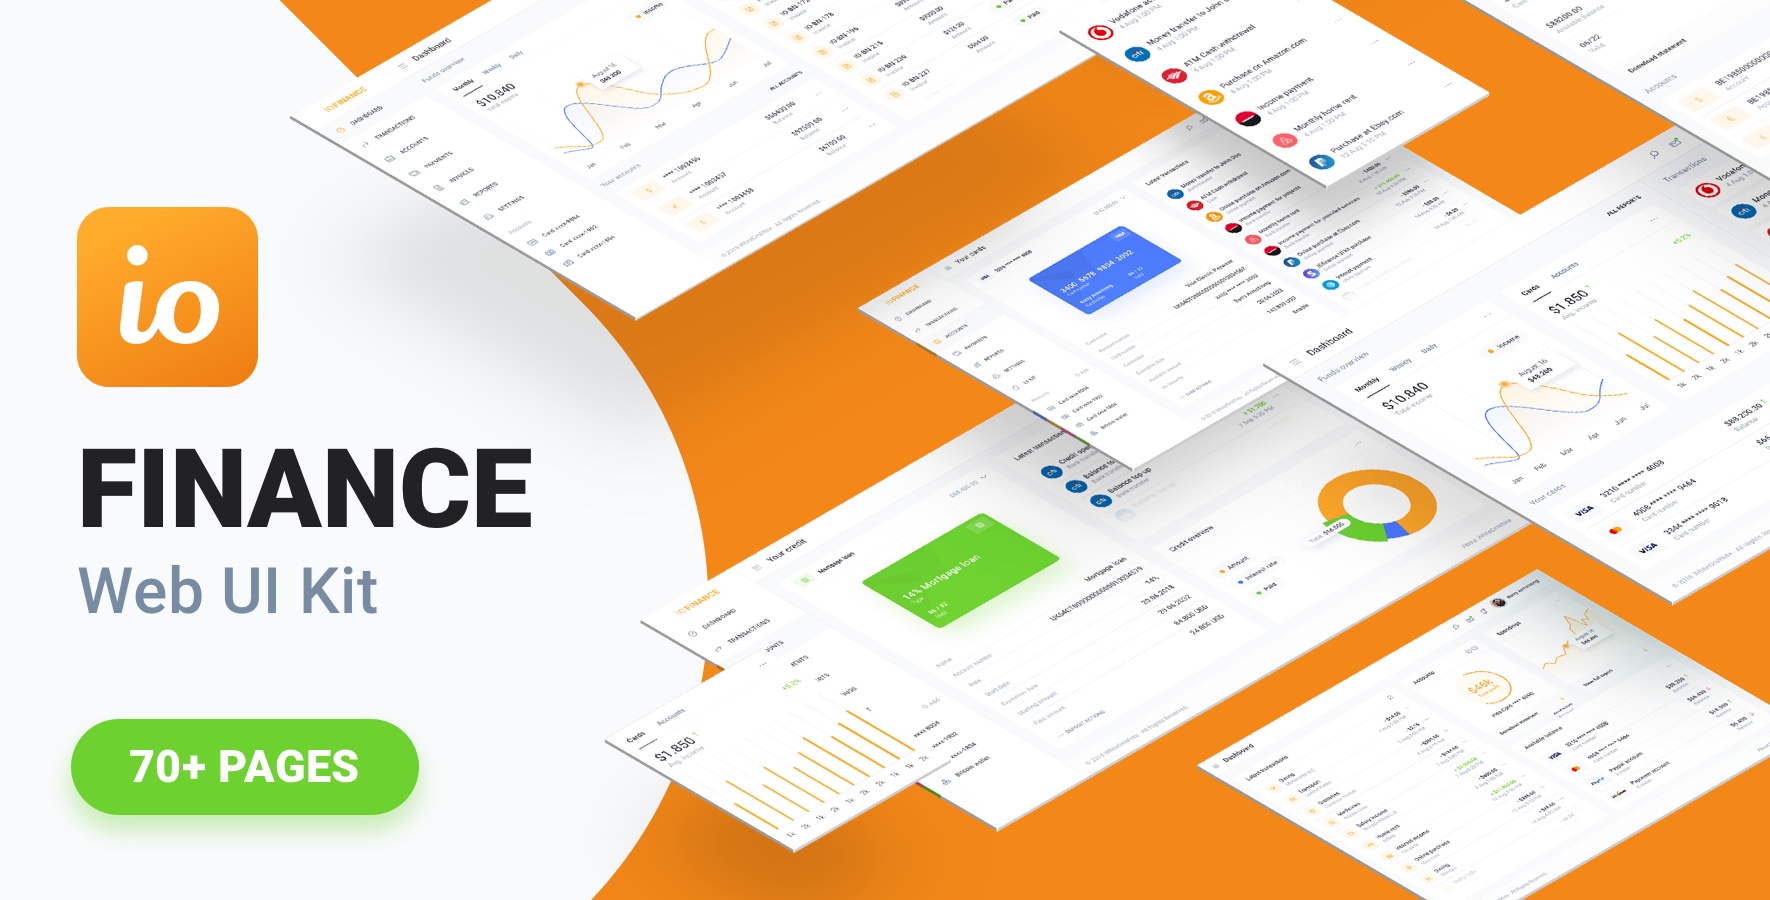 IOFinance - UI Kit for Finance, Banking and Wallet Websites - Sketch Templates 